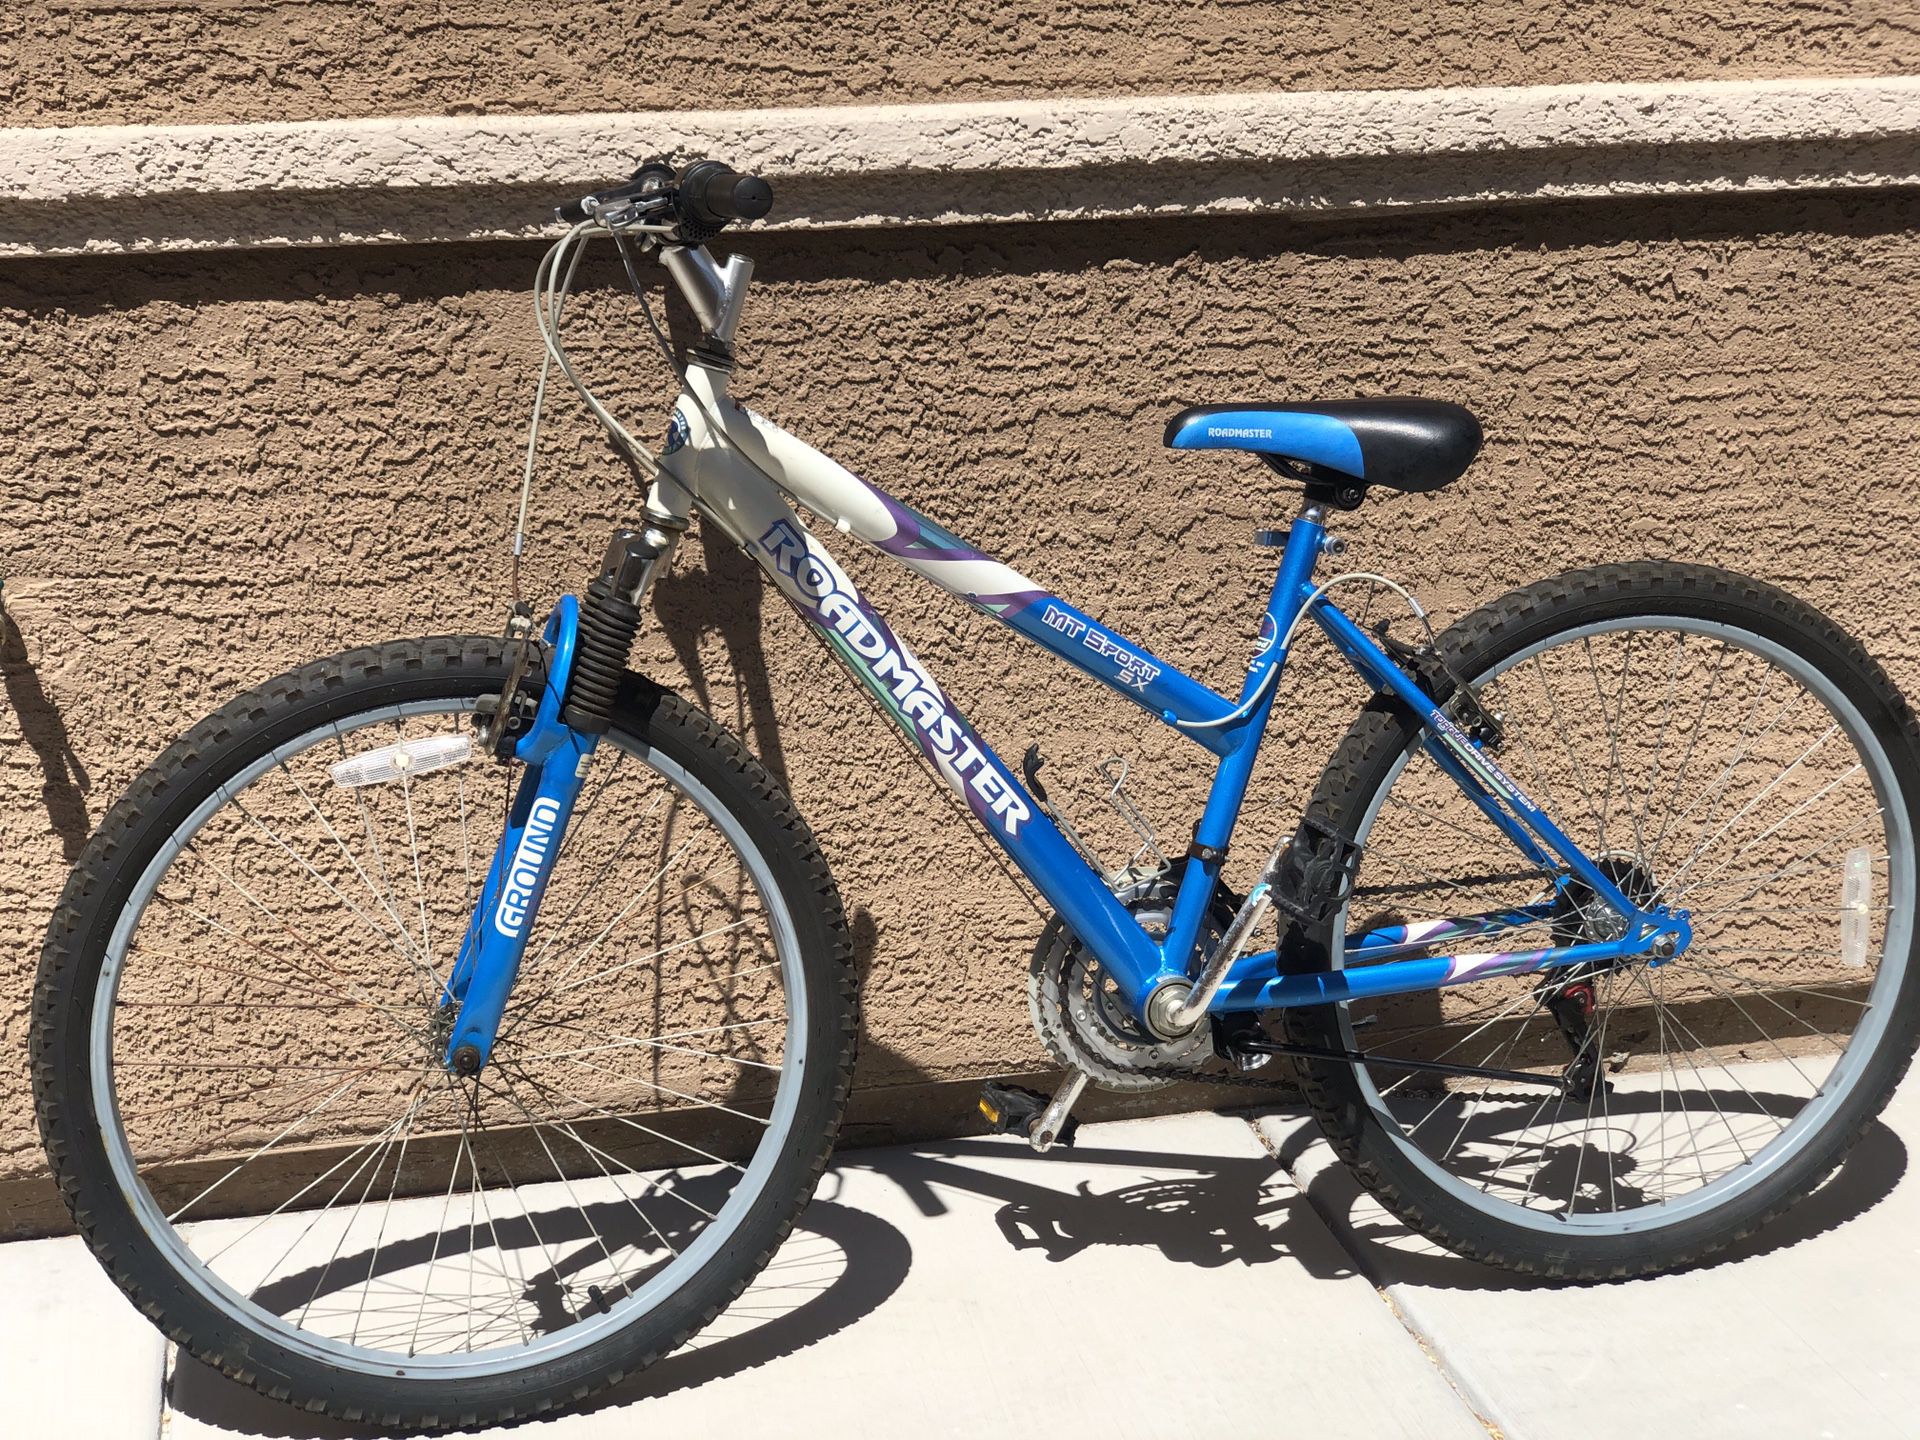 Used bike for sale